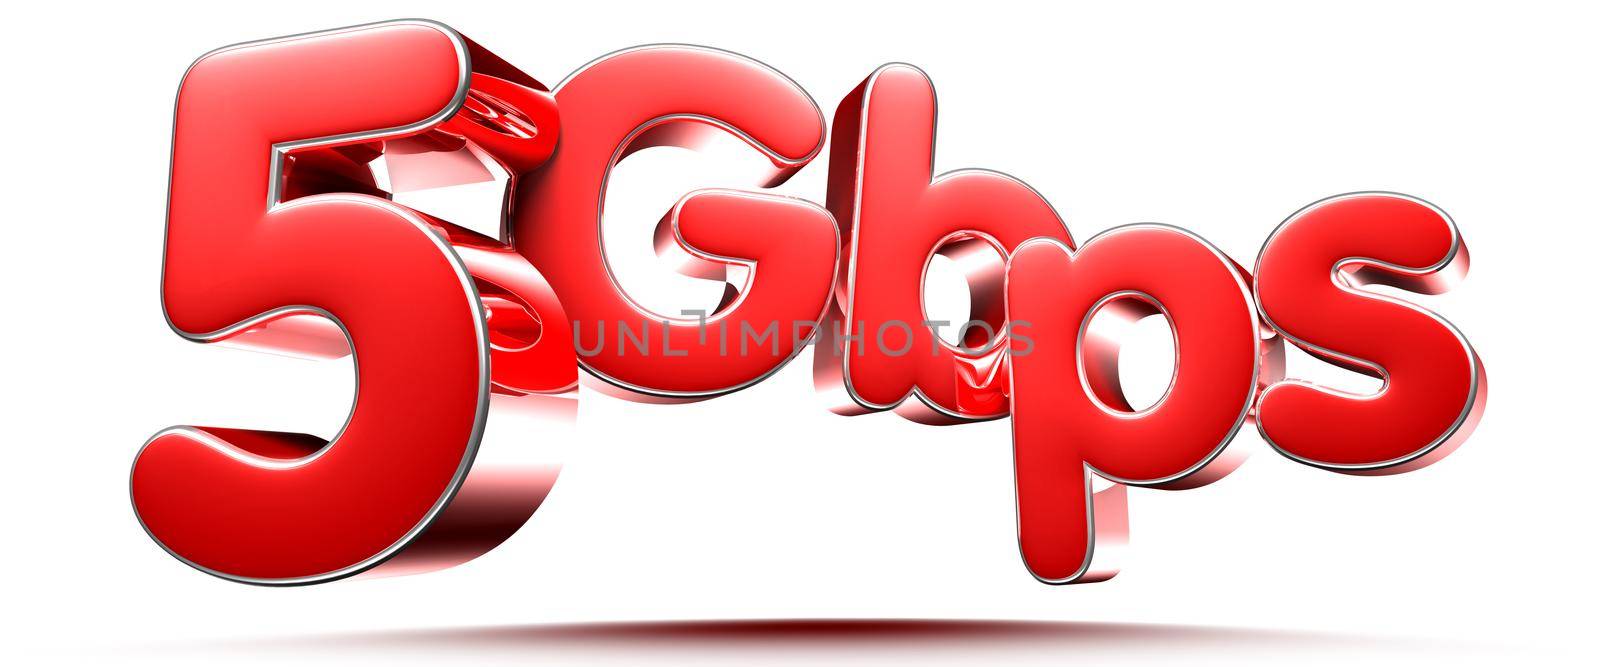 3D illustration 5 Gbps red circles isolated on a white background with clipping path.